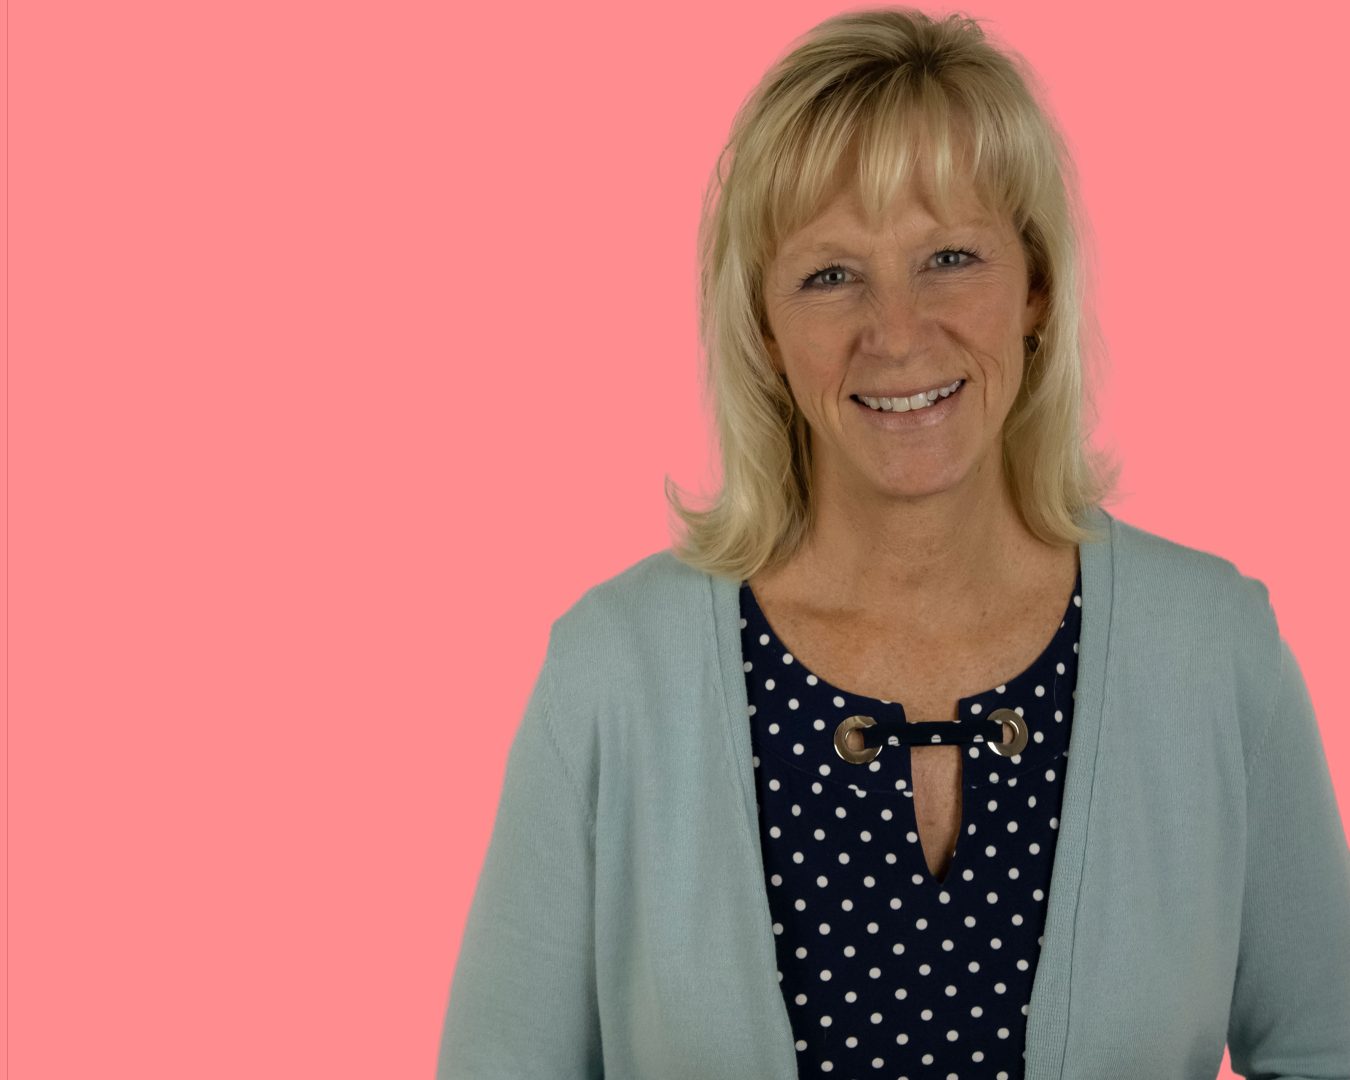 Patti Kinnear smiling in a polka dot shirt and blue cardigan. The background appears pink